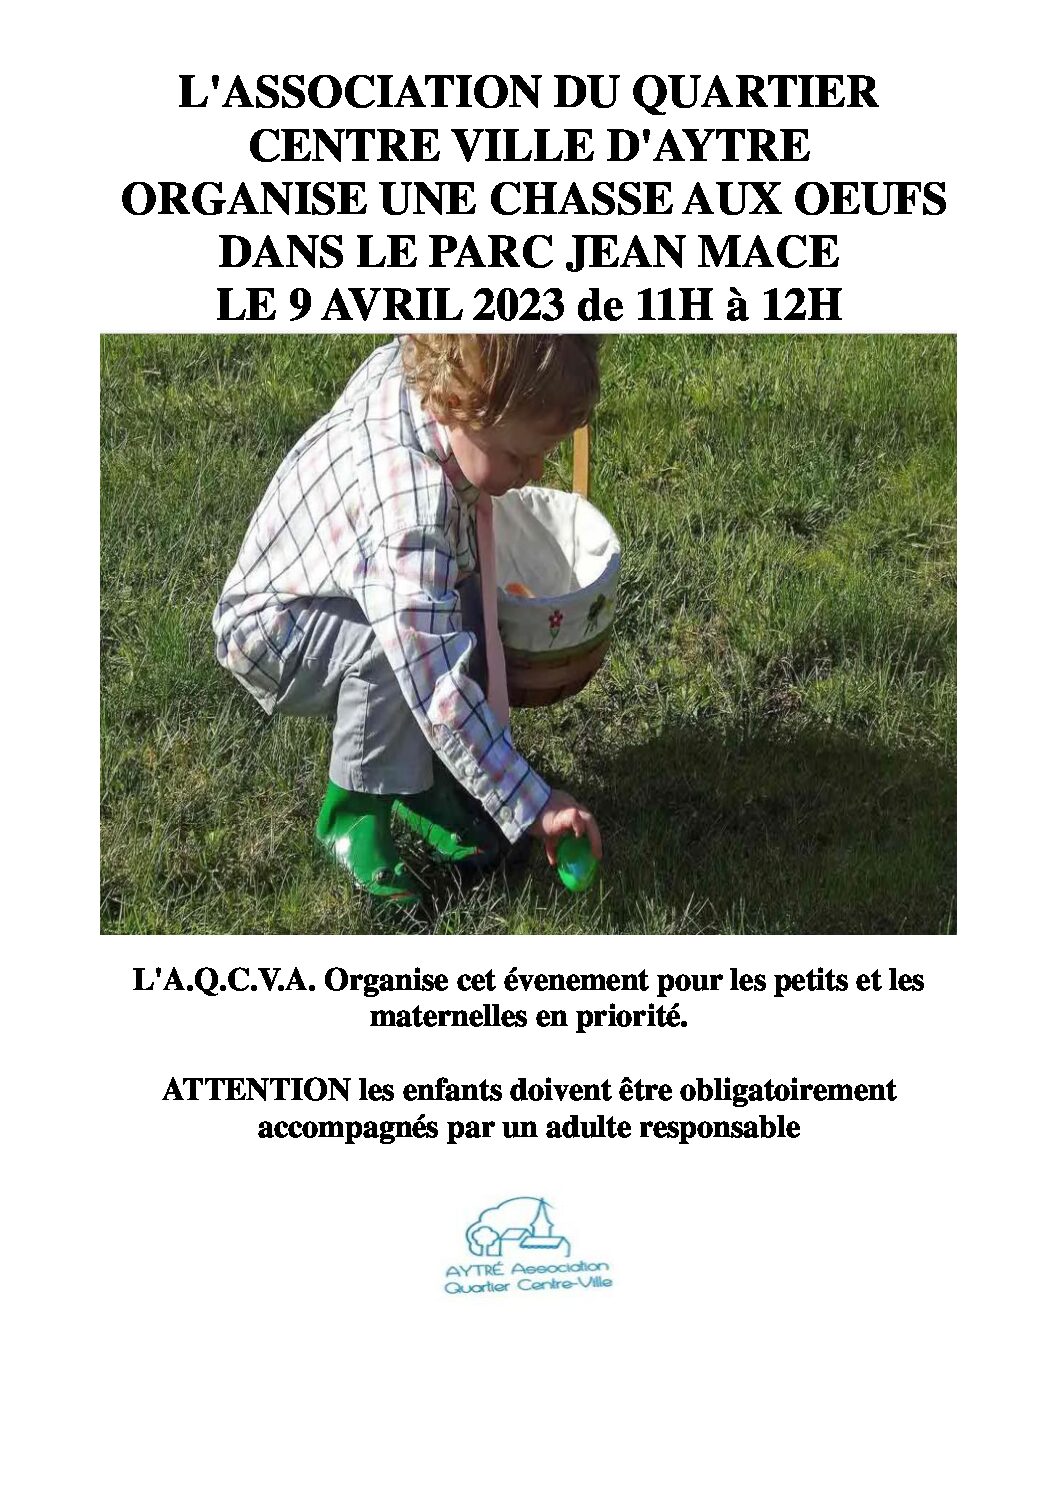 CHASSE AUX OEUFS 9 AVRIL 2023